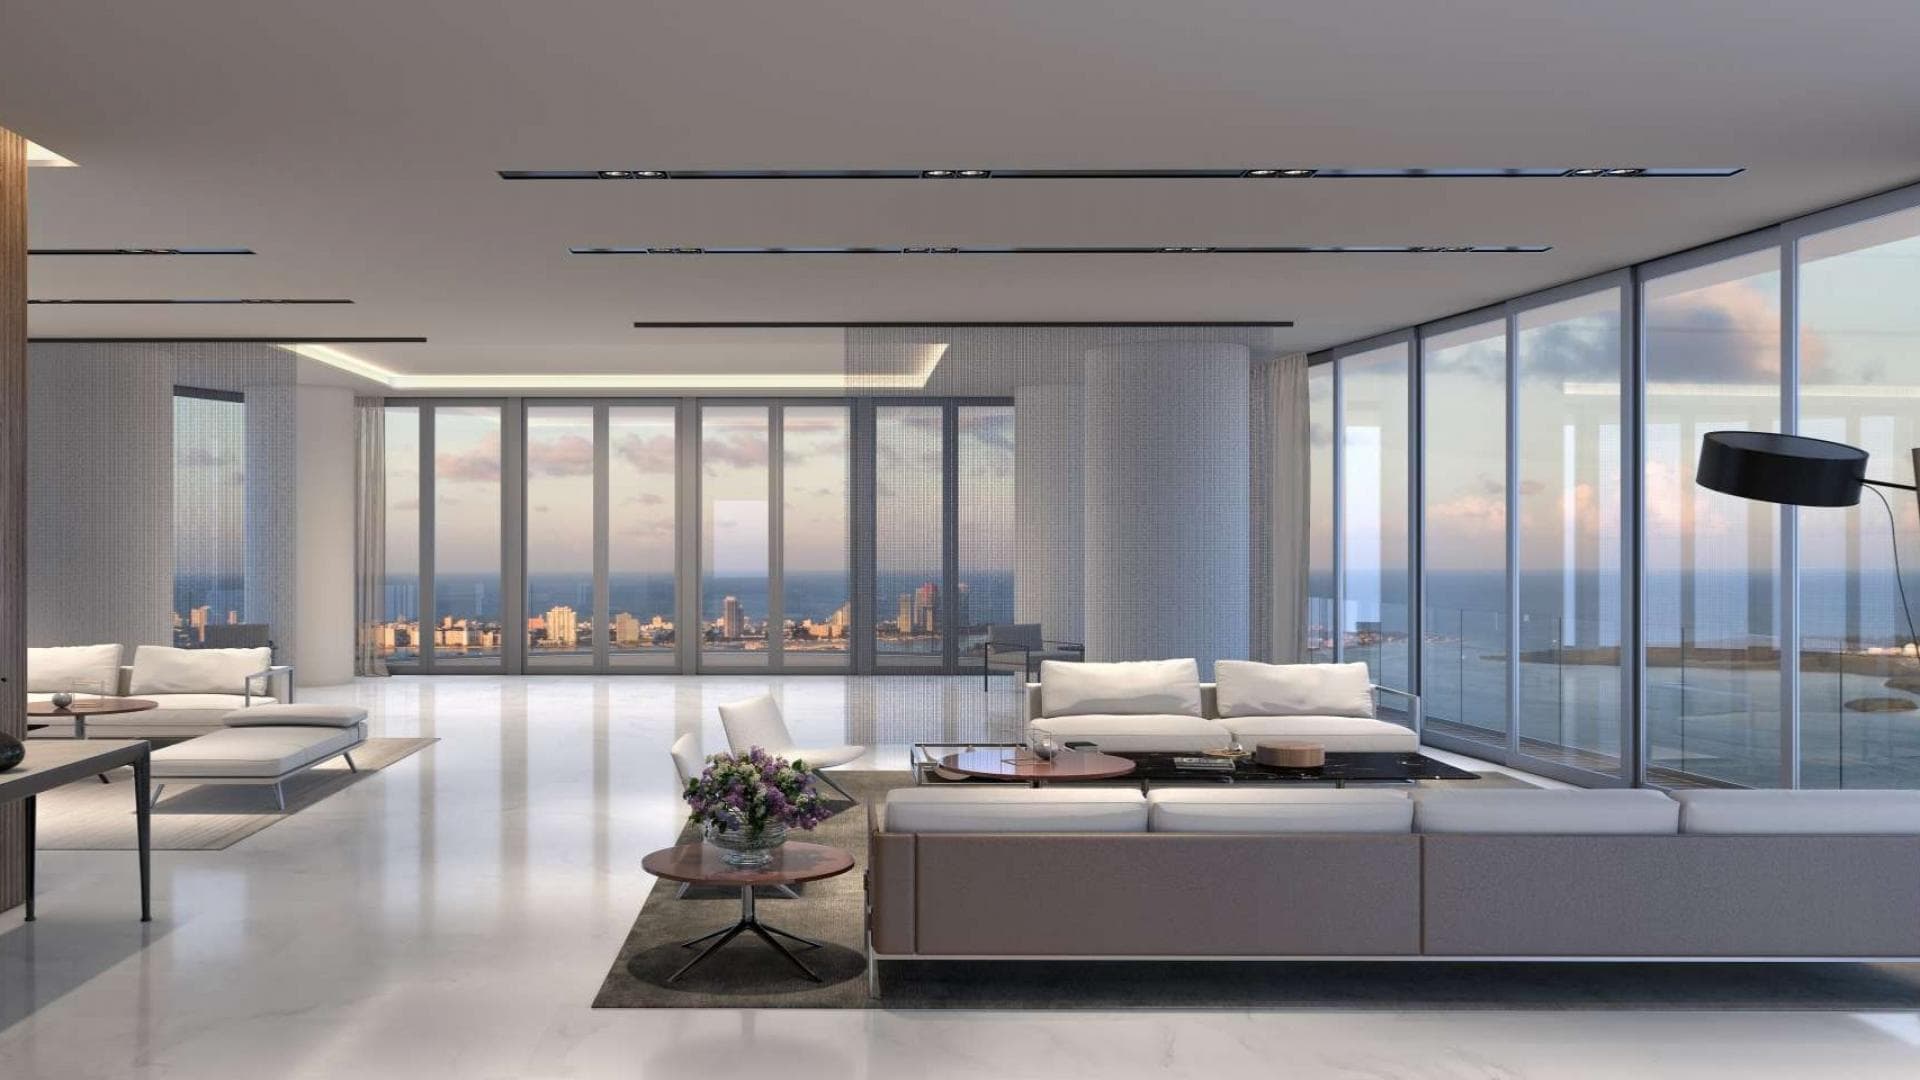 7 Bedroom Penthouse For Sale Miami Lp07432 1211b172fa3ee800.jpg